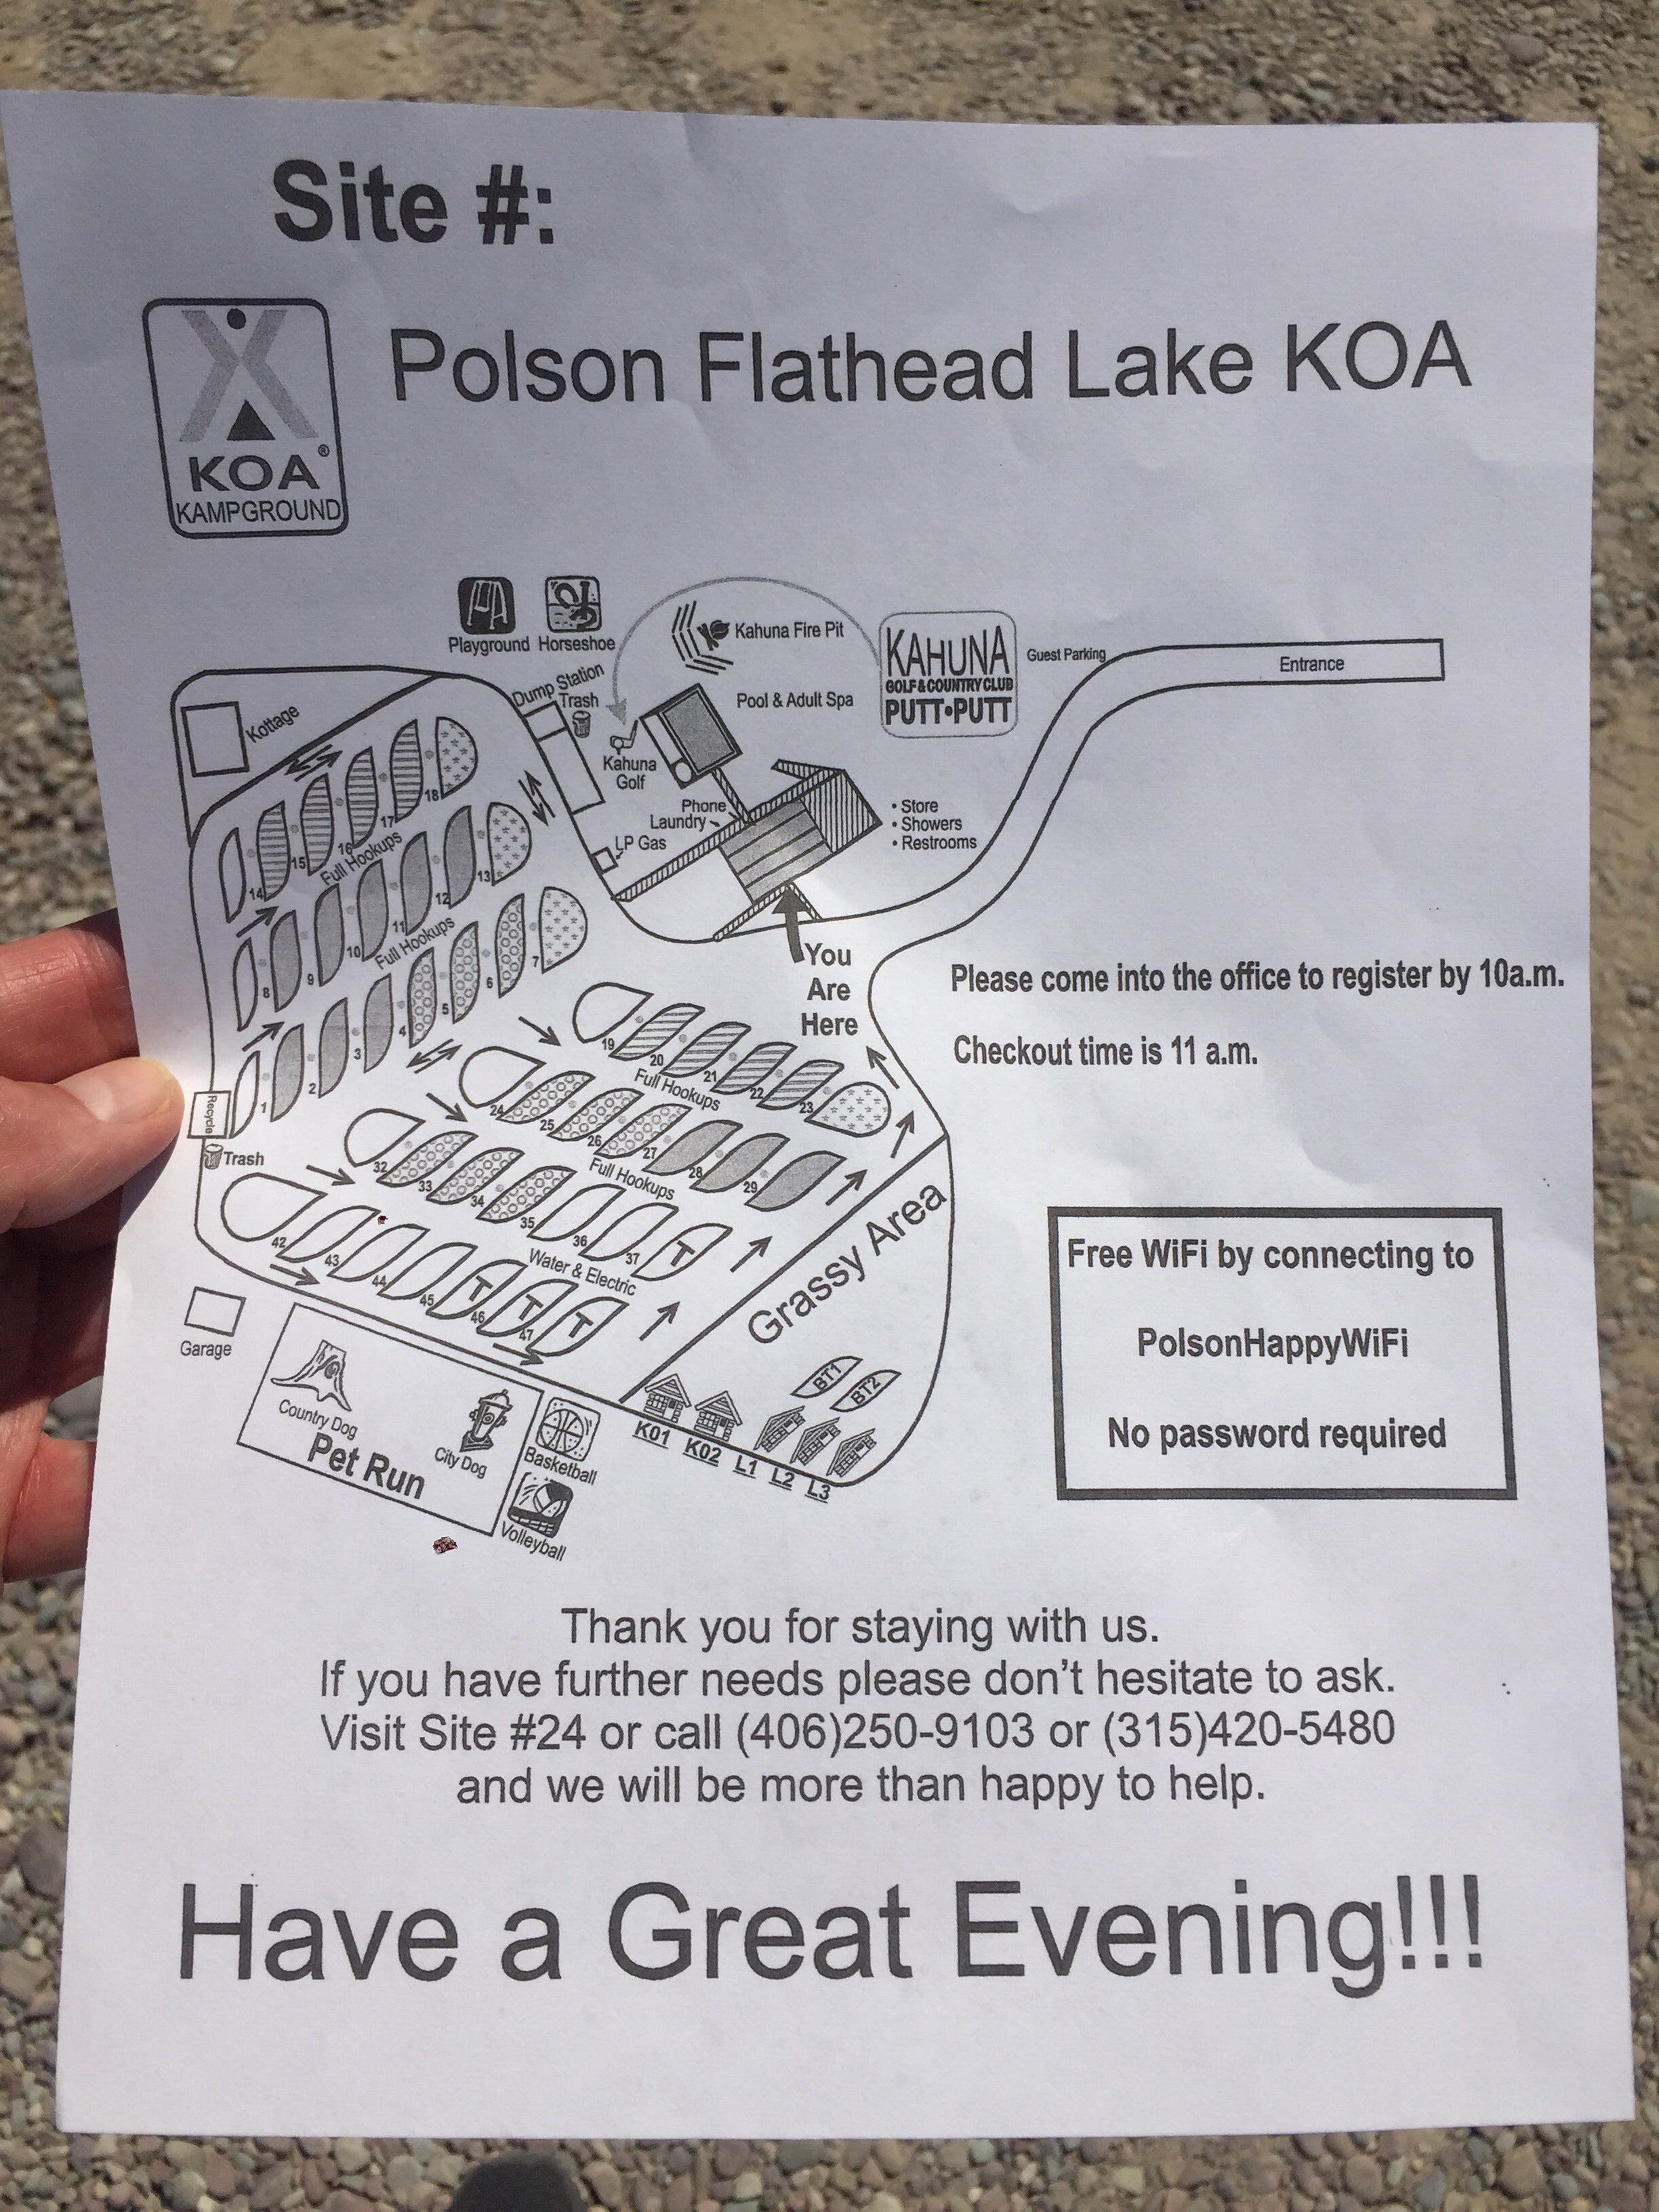 Camper submitted image from Polson-Flathead Lake KOA - 3